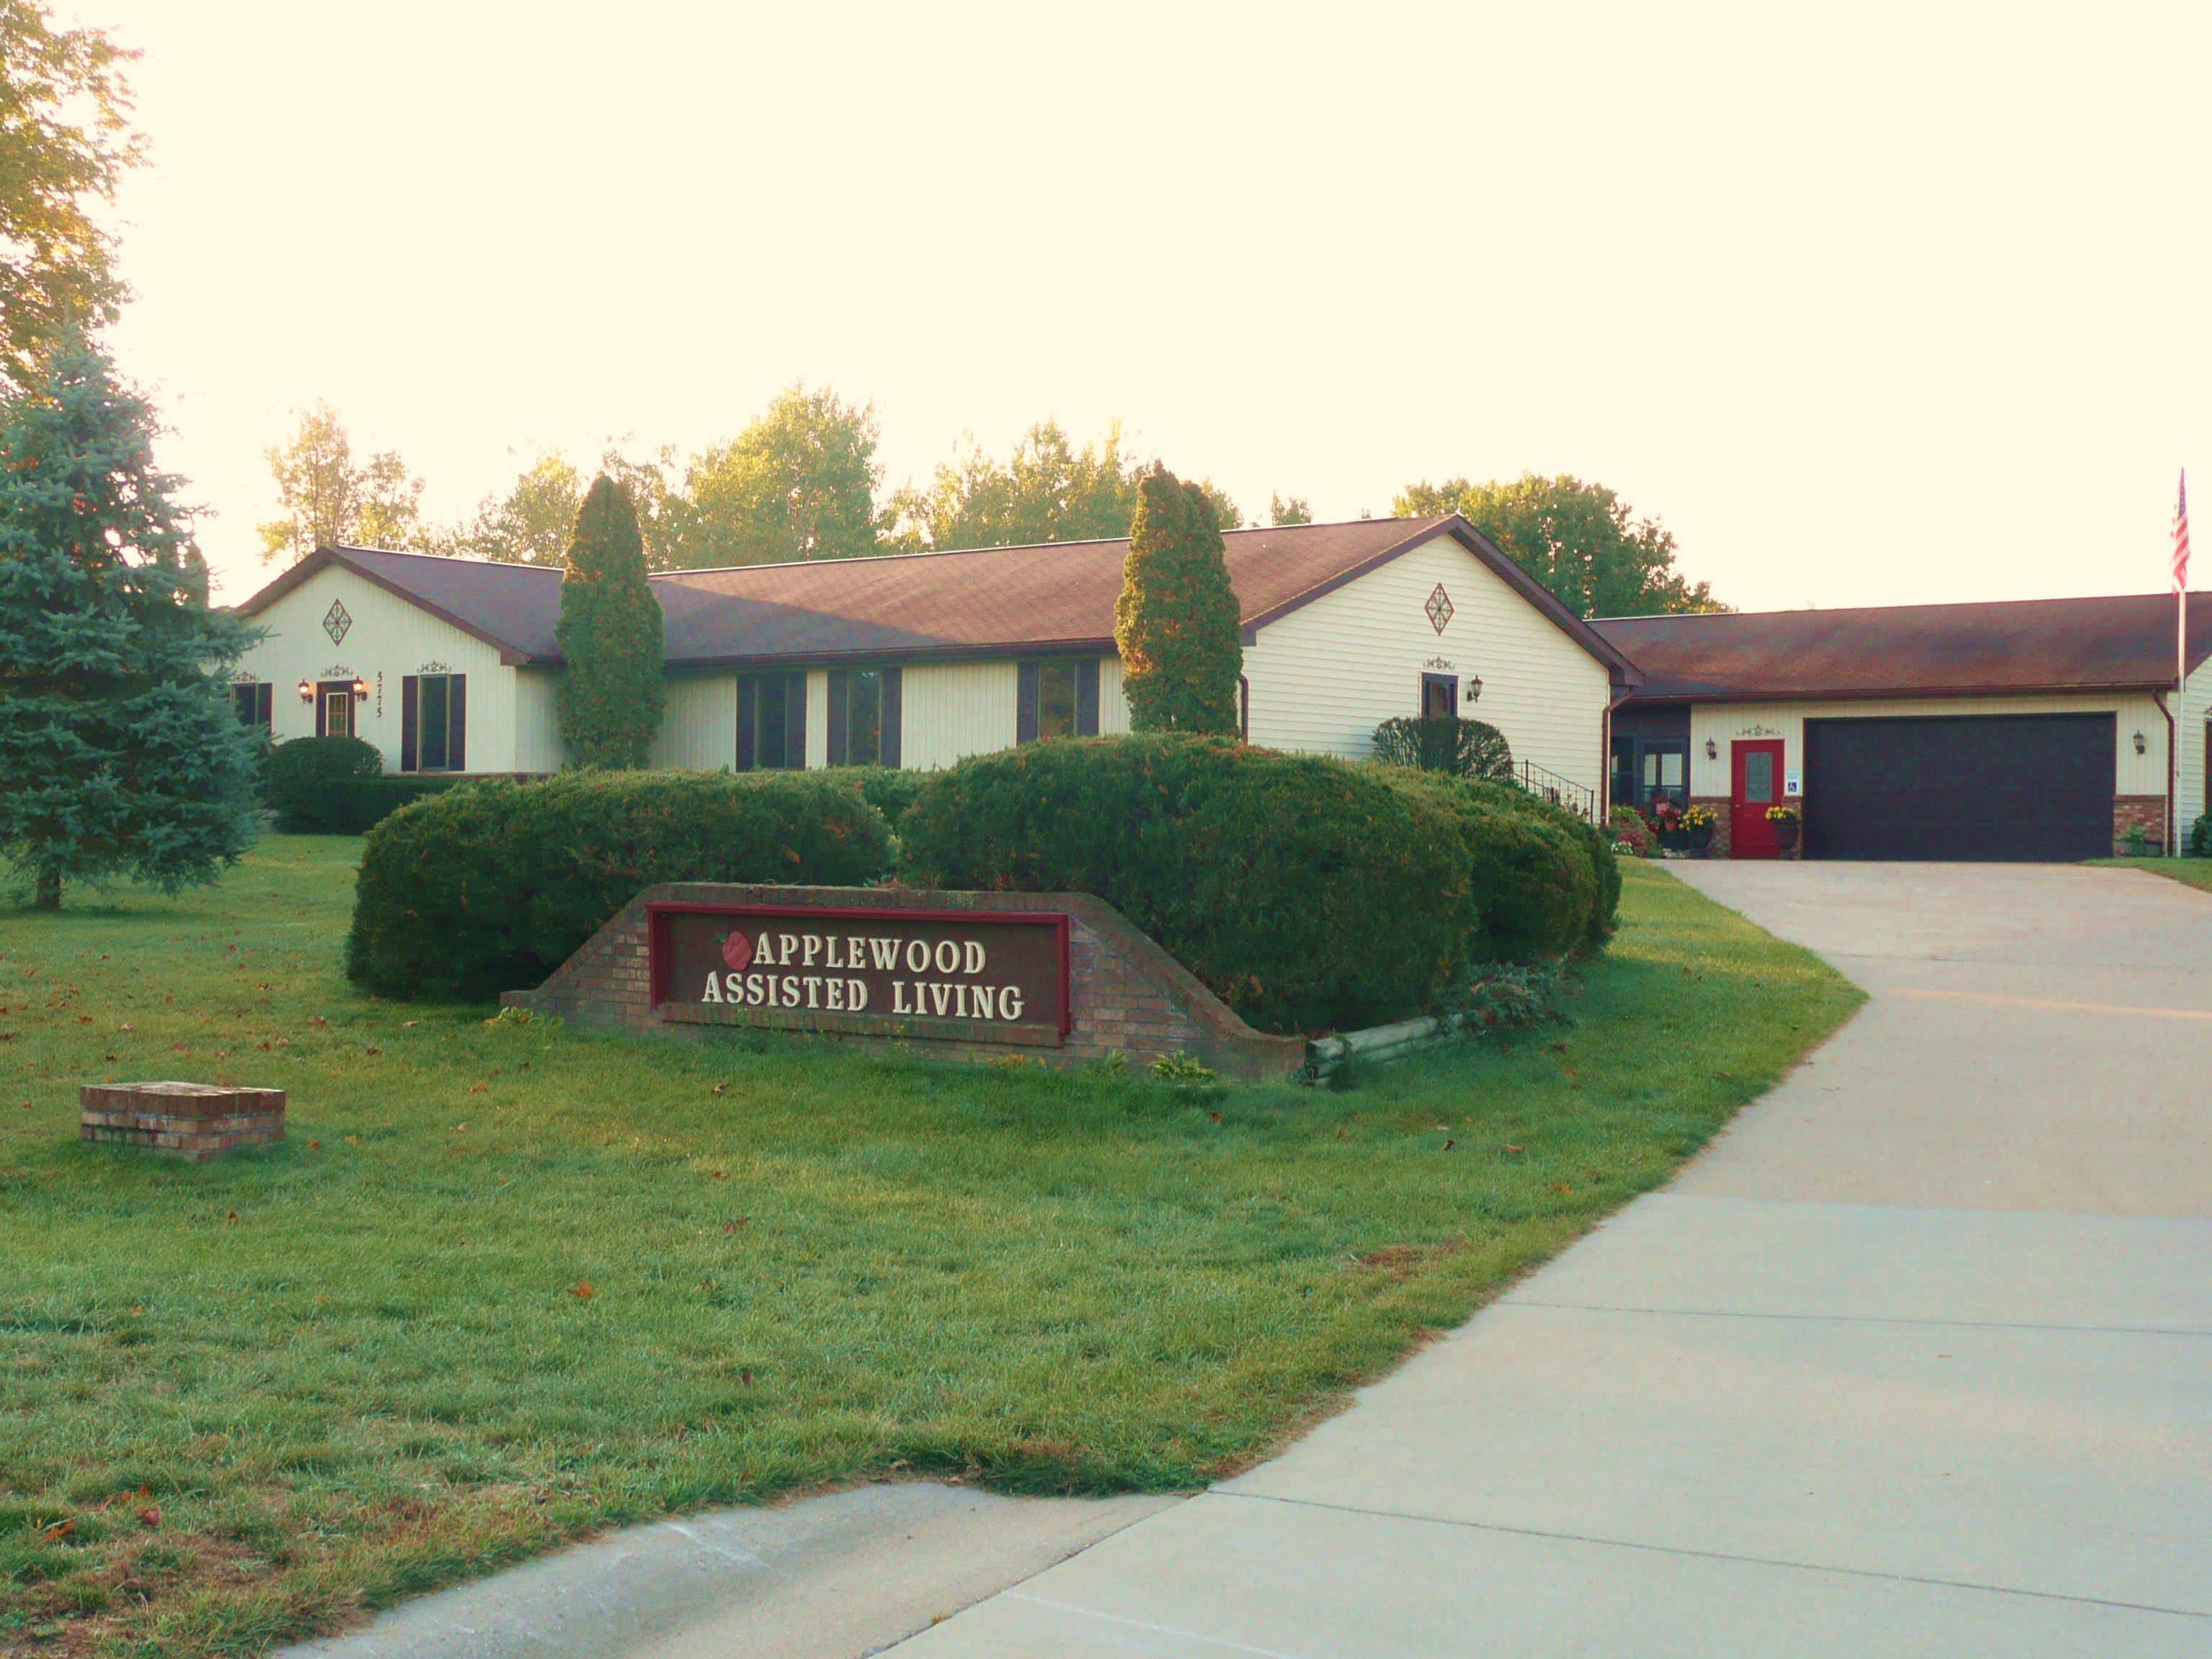 Photo of Applewood Assisted Living